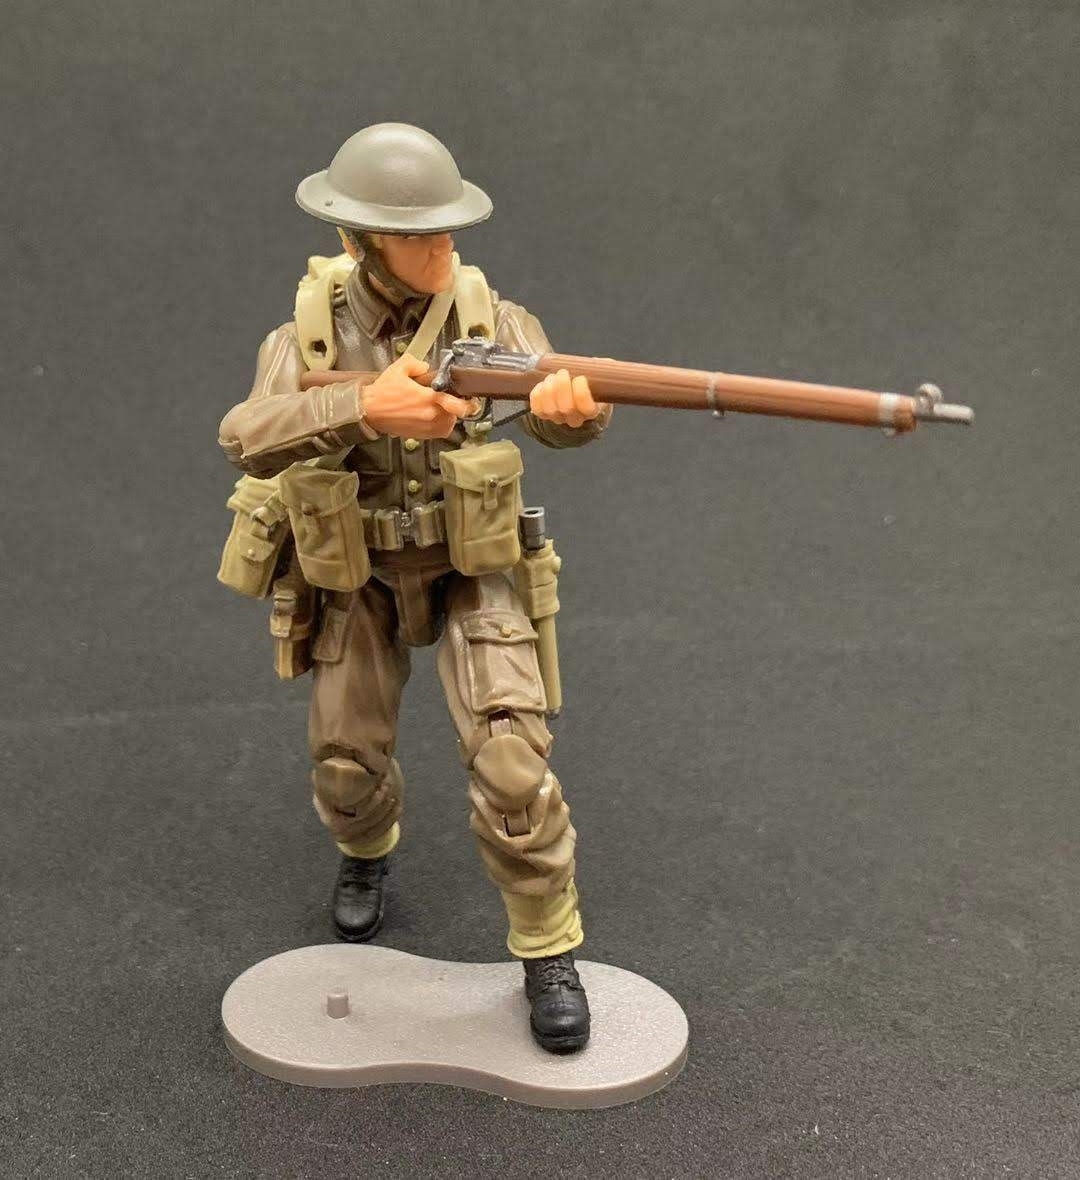 18 Scale Marauder Task Force Action Figure